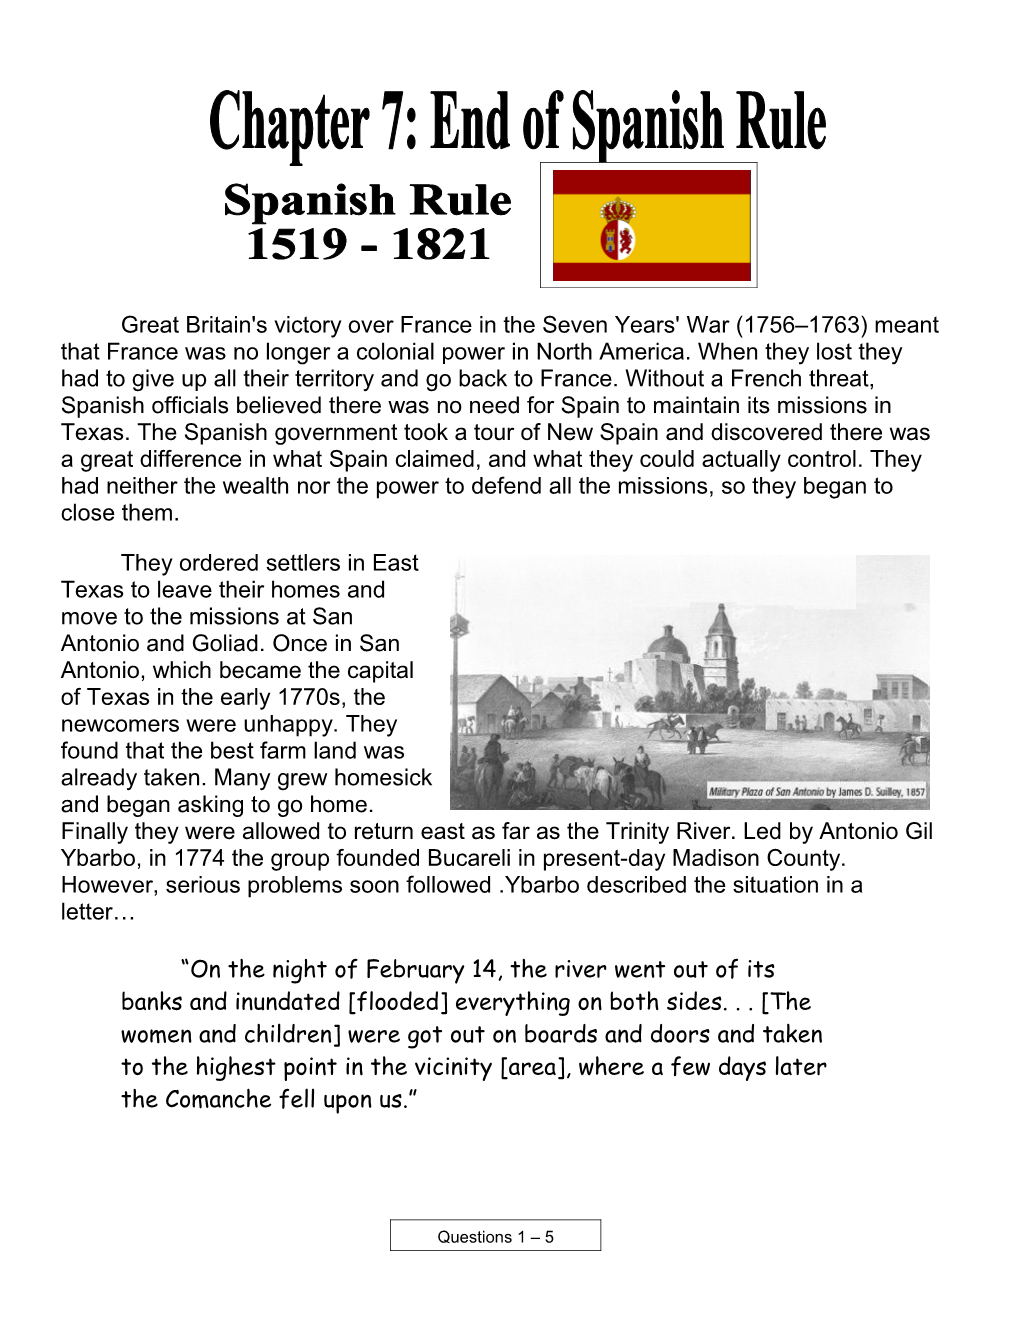 Chapter 6: End of Spanish Rule